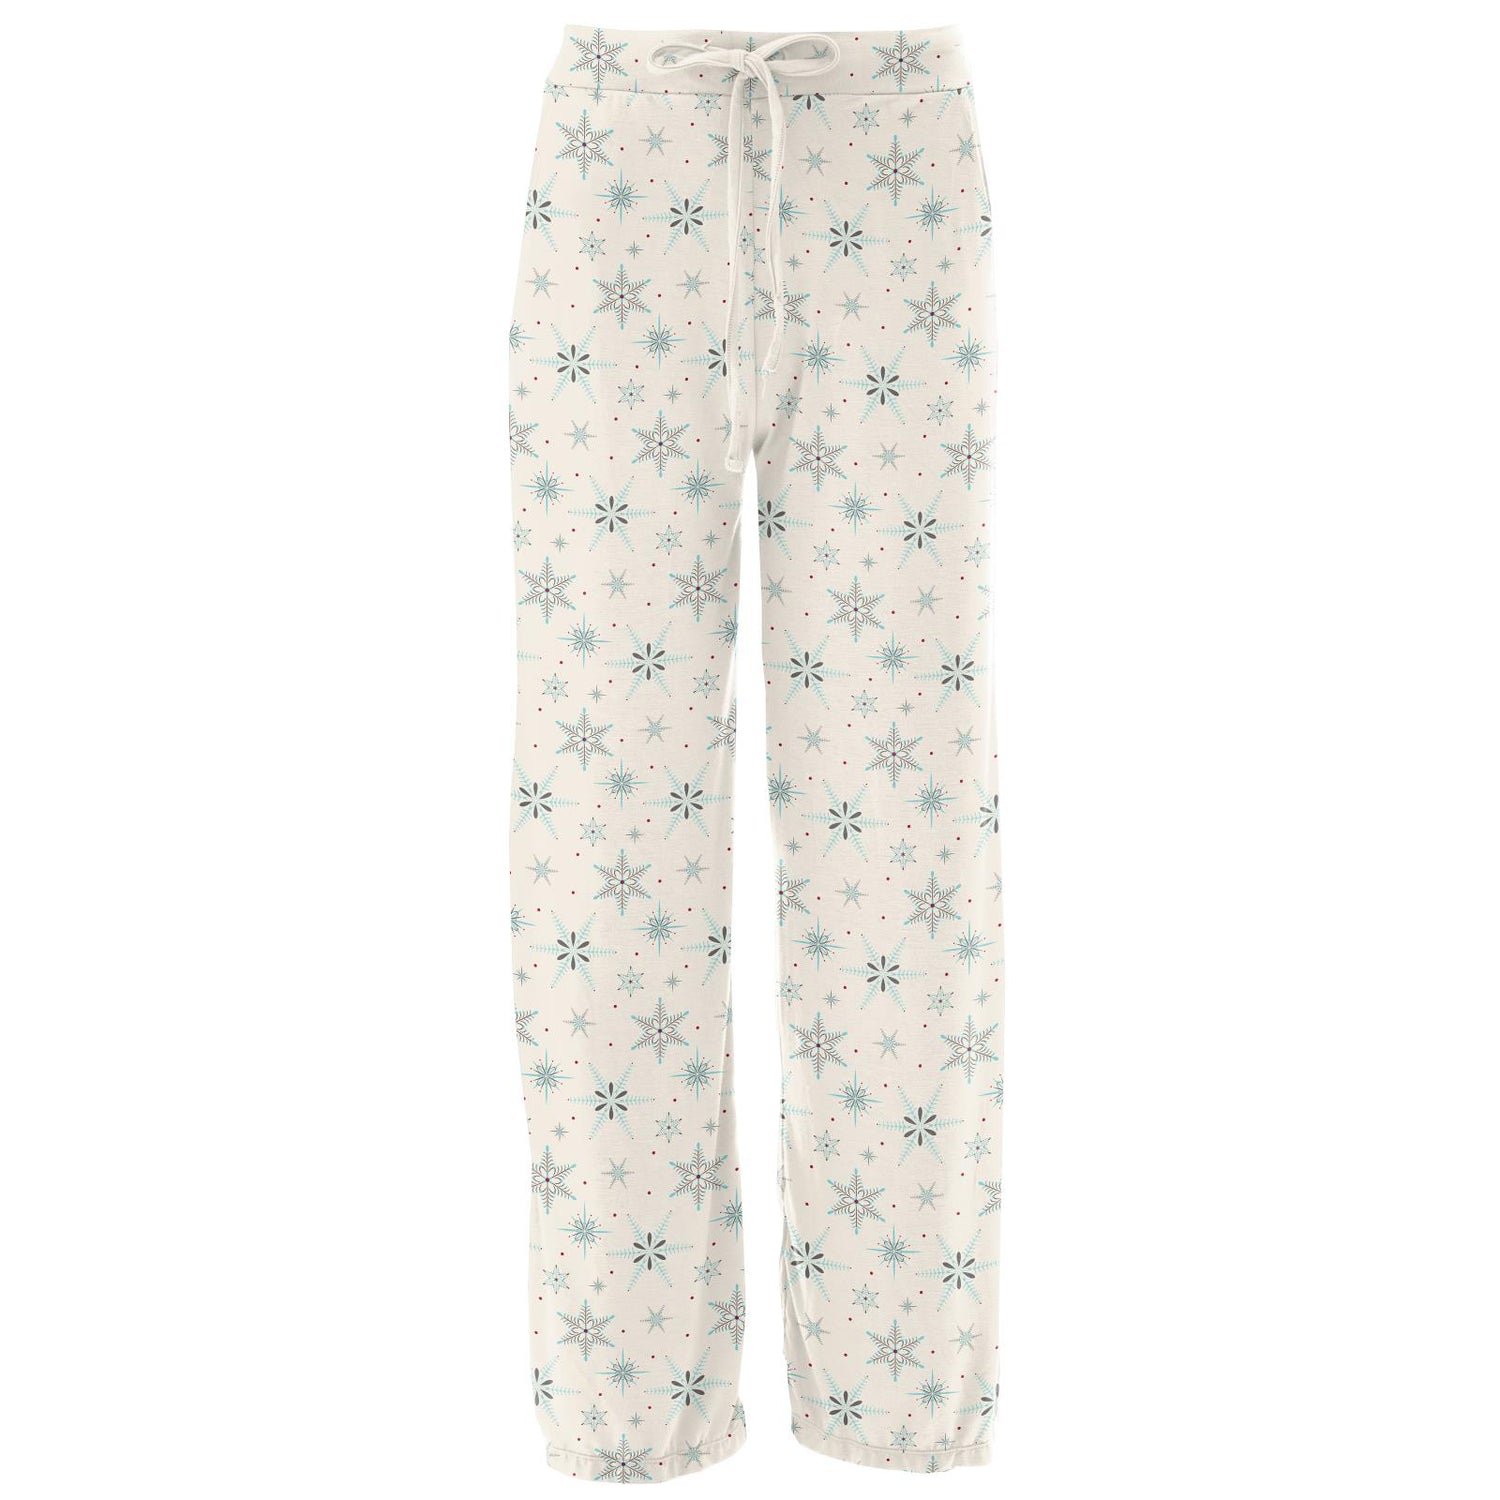 Women's Print Lounge Pants in Natural Snowflakes